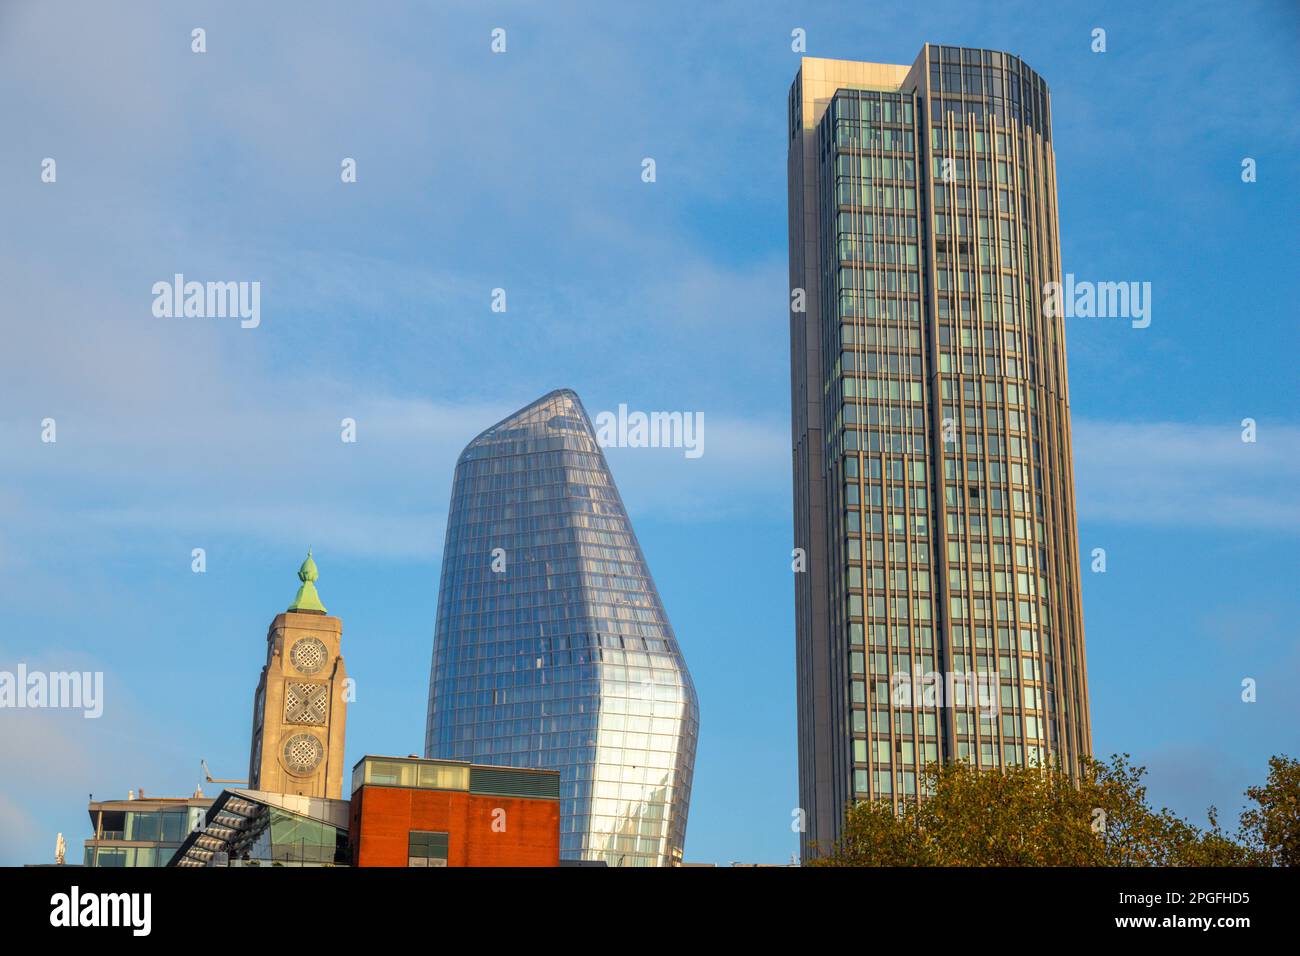 The Oxo Tower, One Blackfriars and Southbank Tower Group, Bankside, Londres, Royaume-Uni Banque D'Images